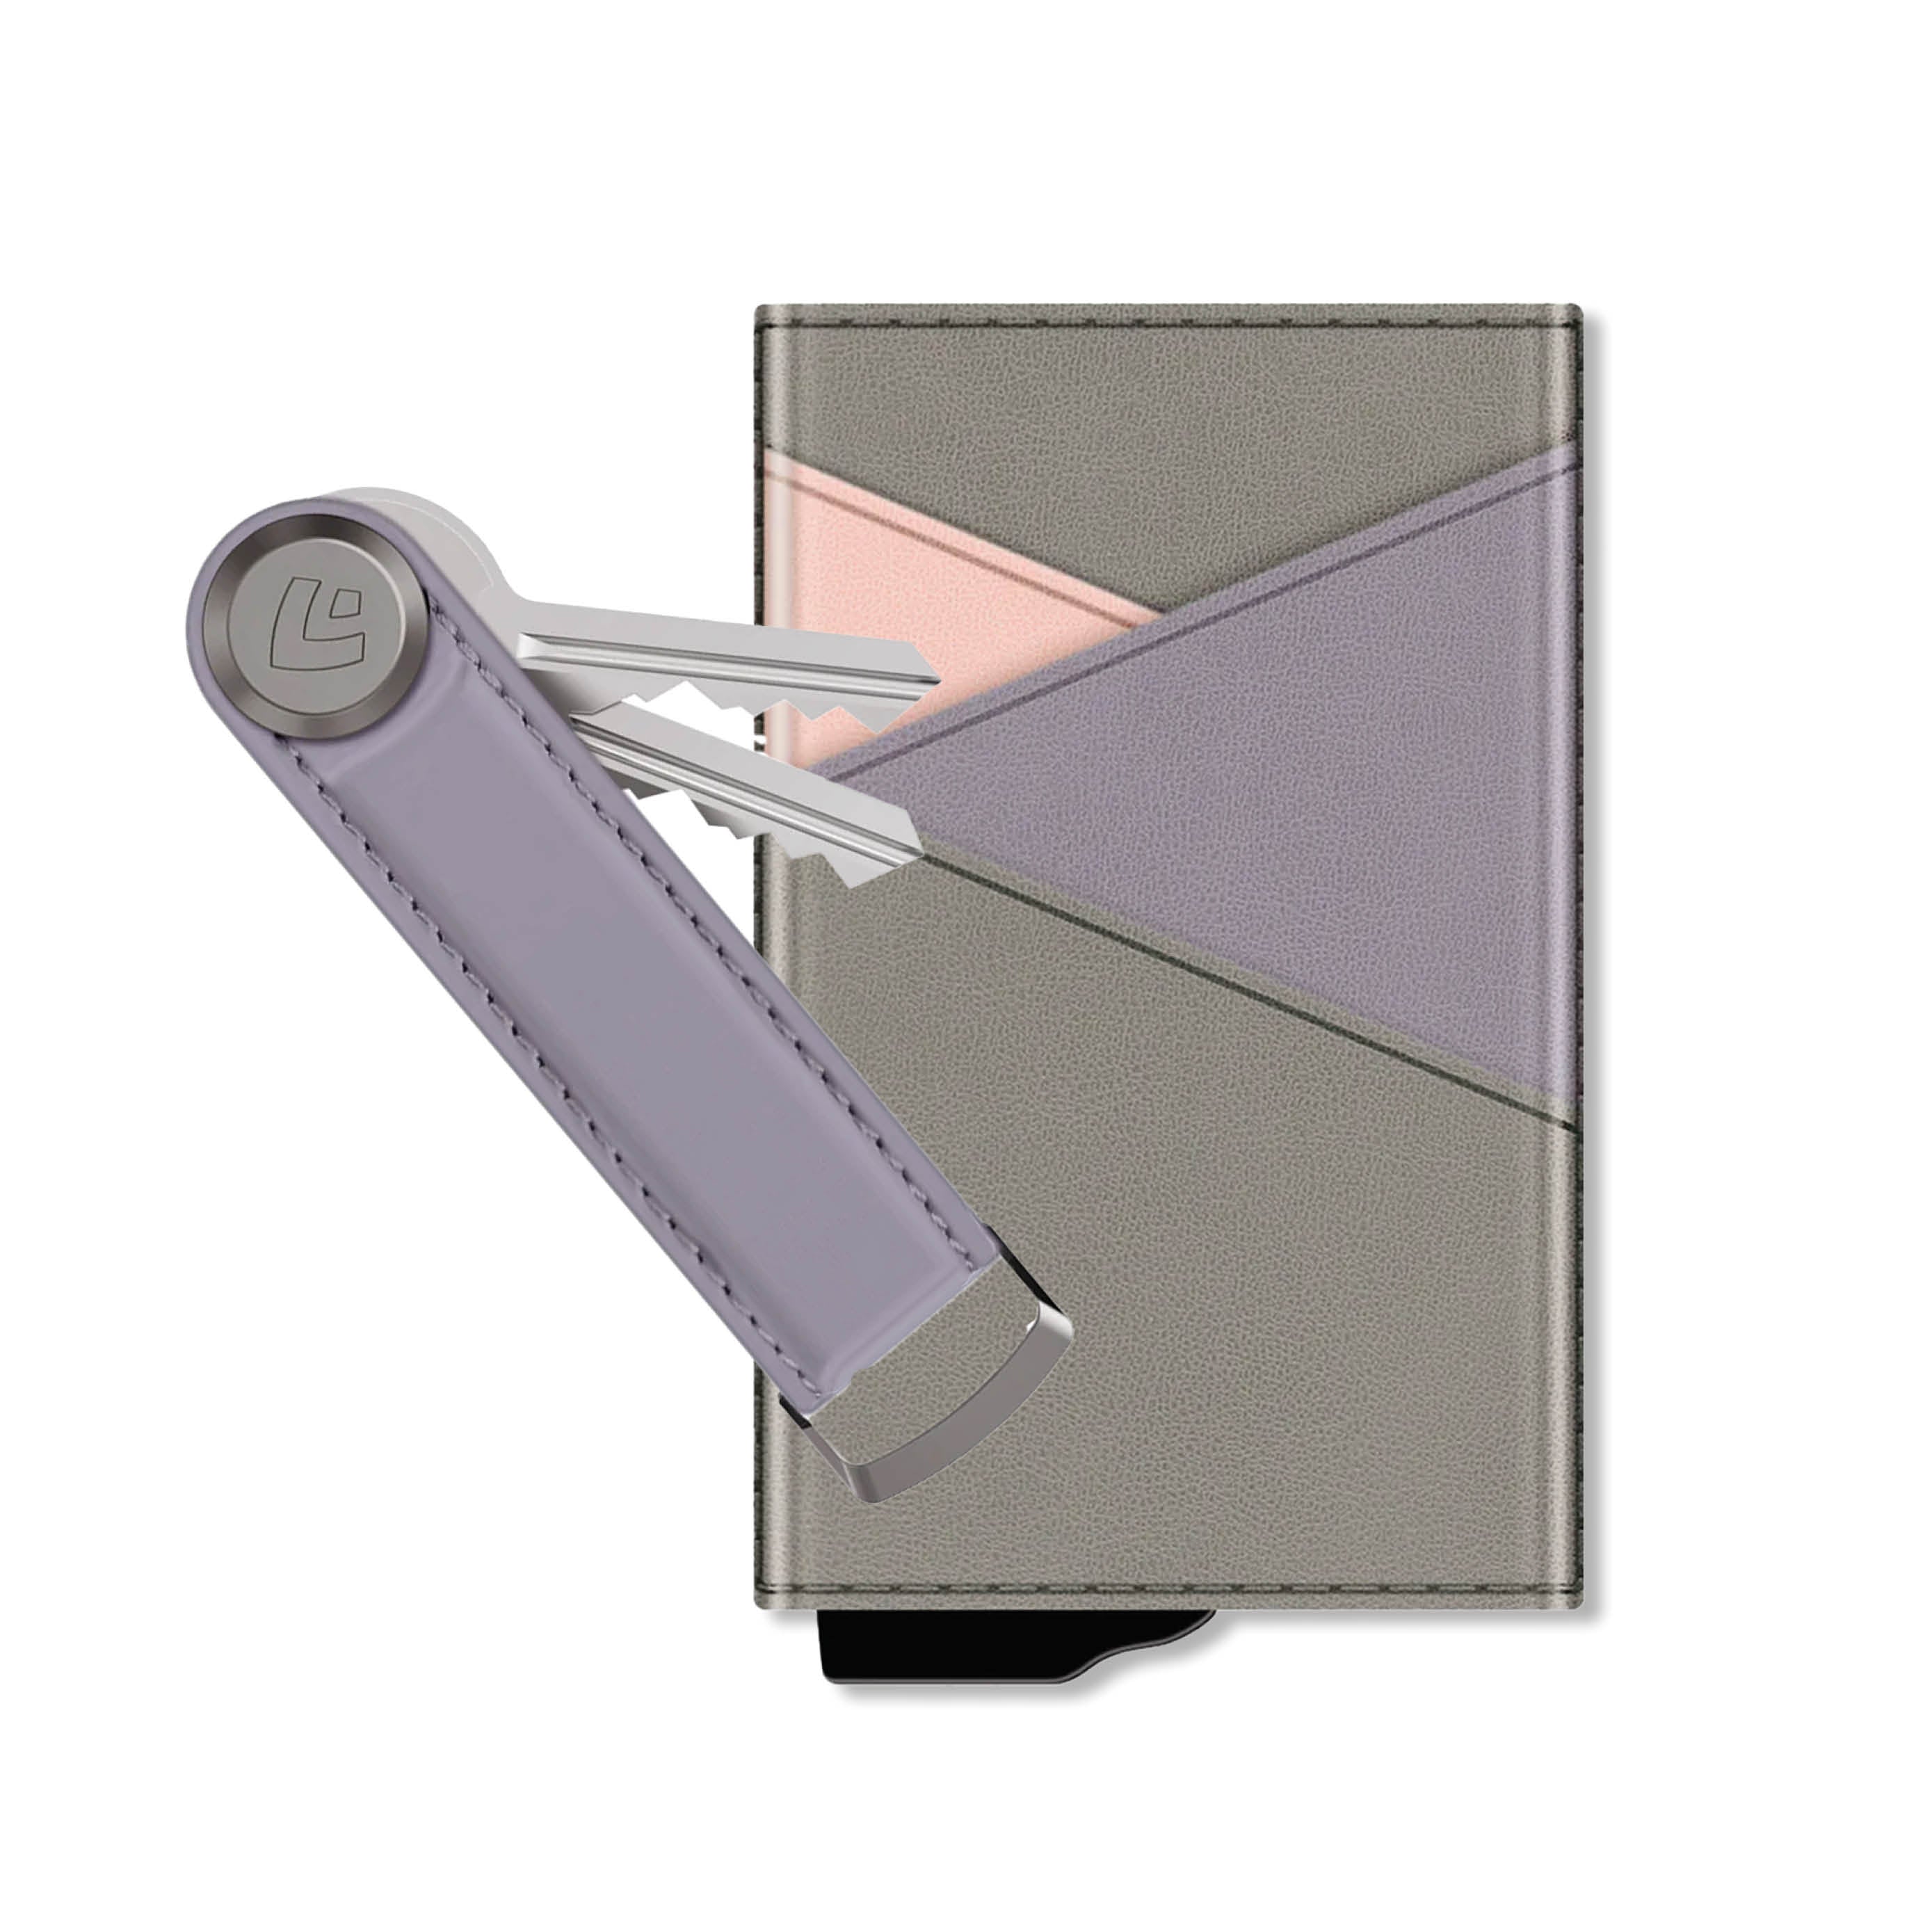 Gift Set Card Case Snap Gray with Ejector and Key Organizer Purple